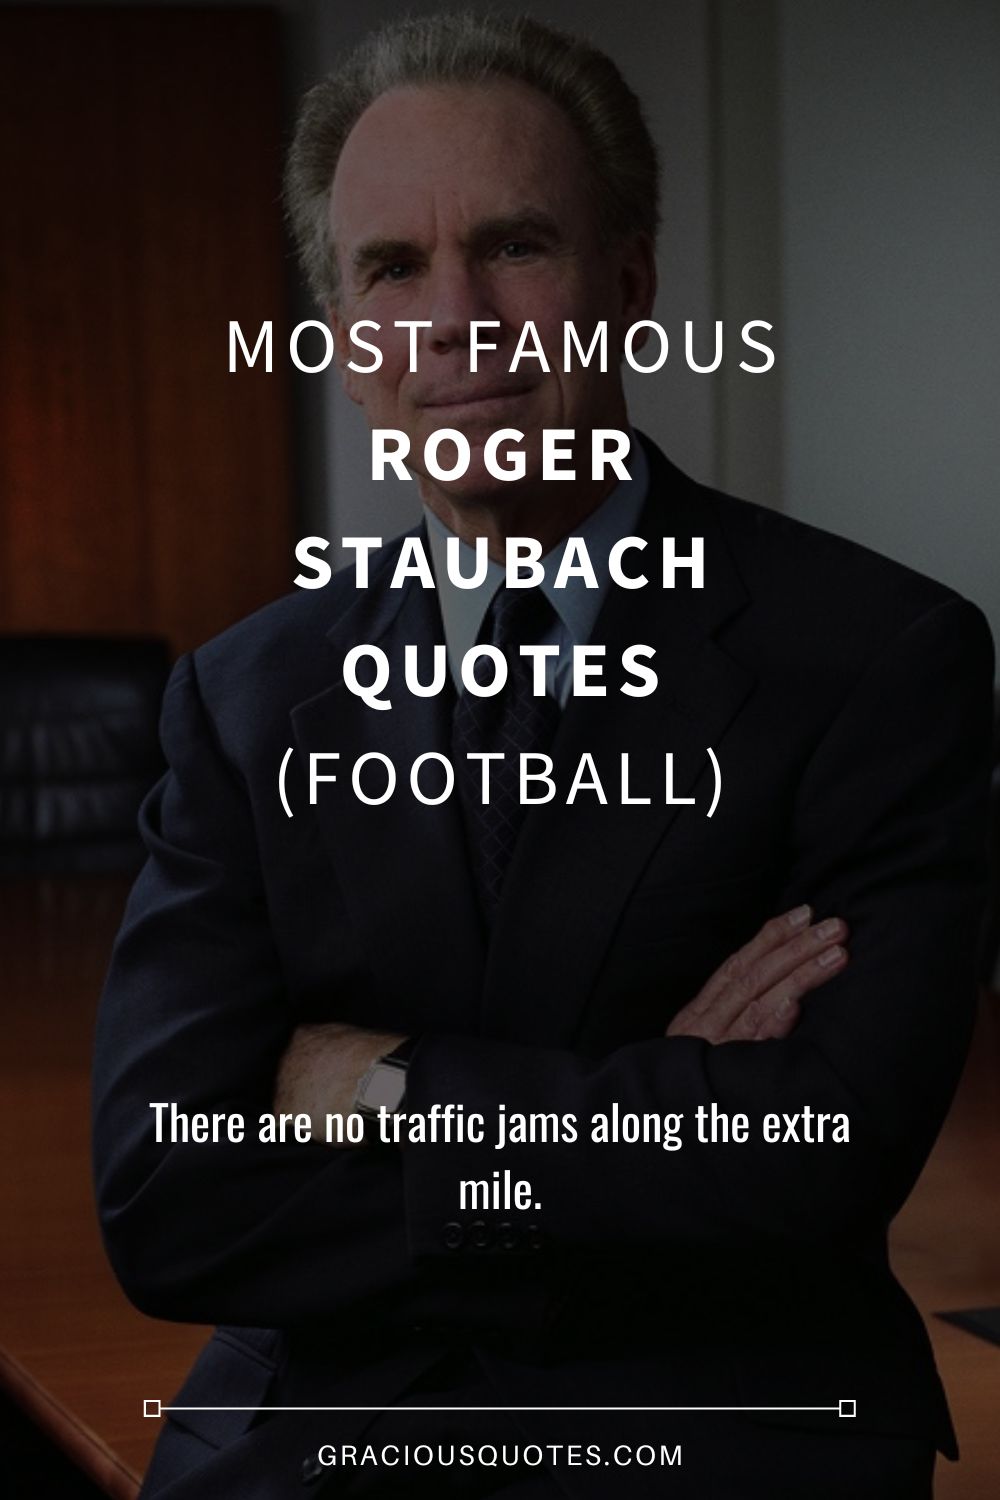 Most Famous Roger Staubach Quotes (FOOTBALL) - Gracious Quotes